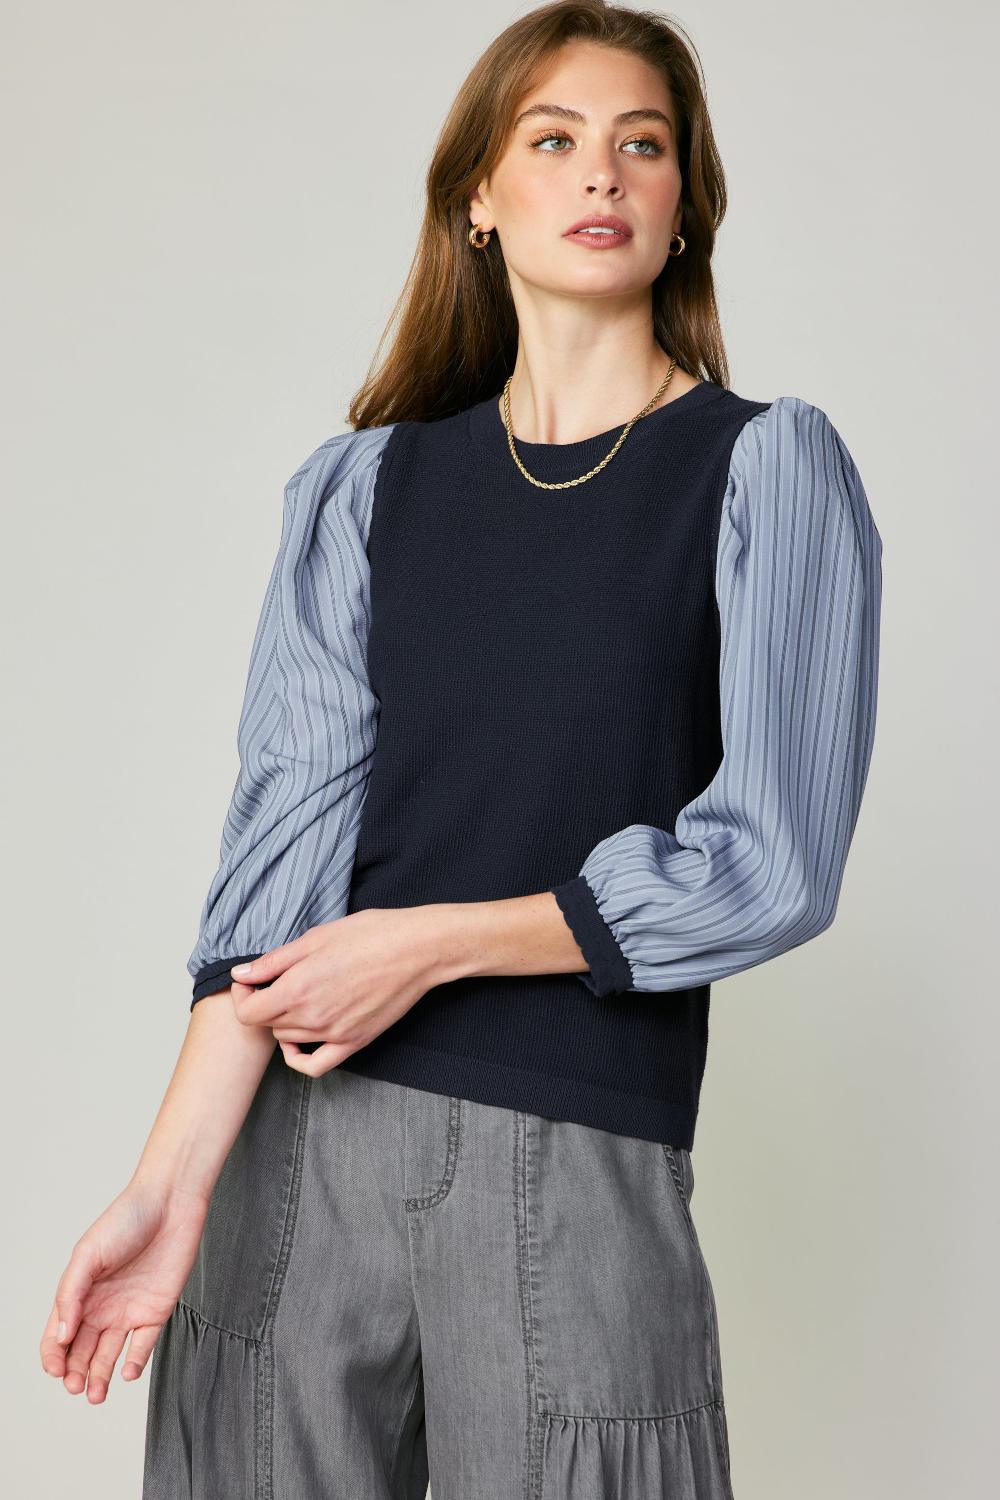 Navy Contrast Top - Strawberry Moon Boutique